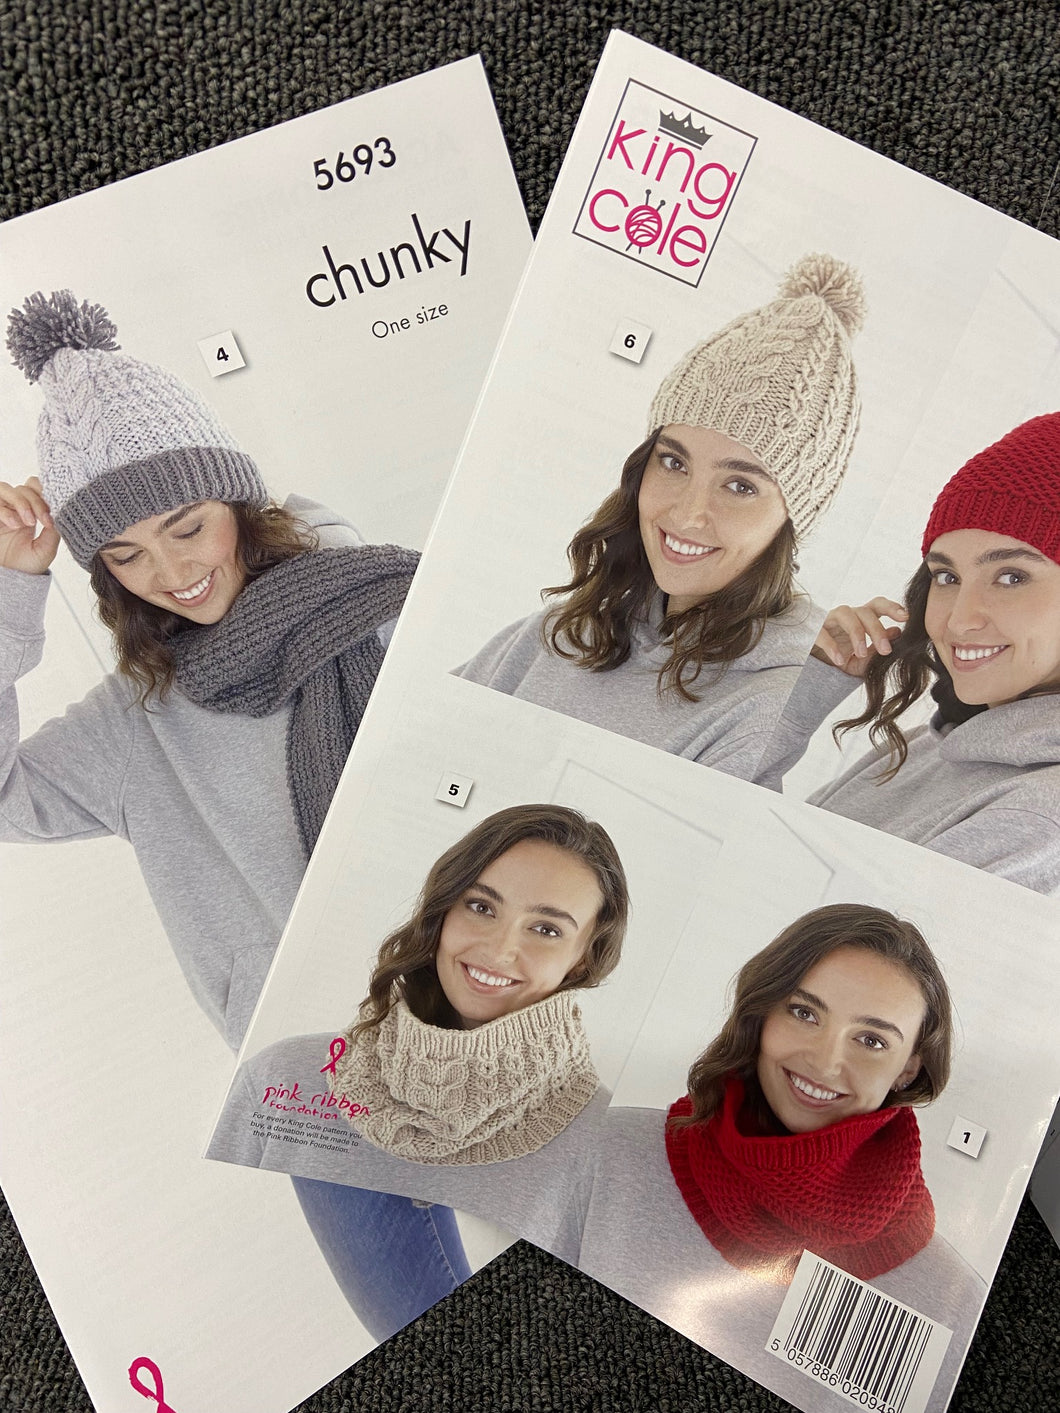 king cole knitting pattern ladies chunky accessories hat scarf cowl scarf ultra soft chunky 5693 fabric shack malmesbury